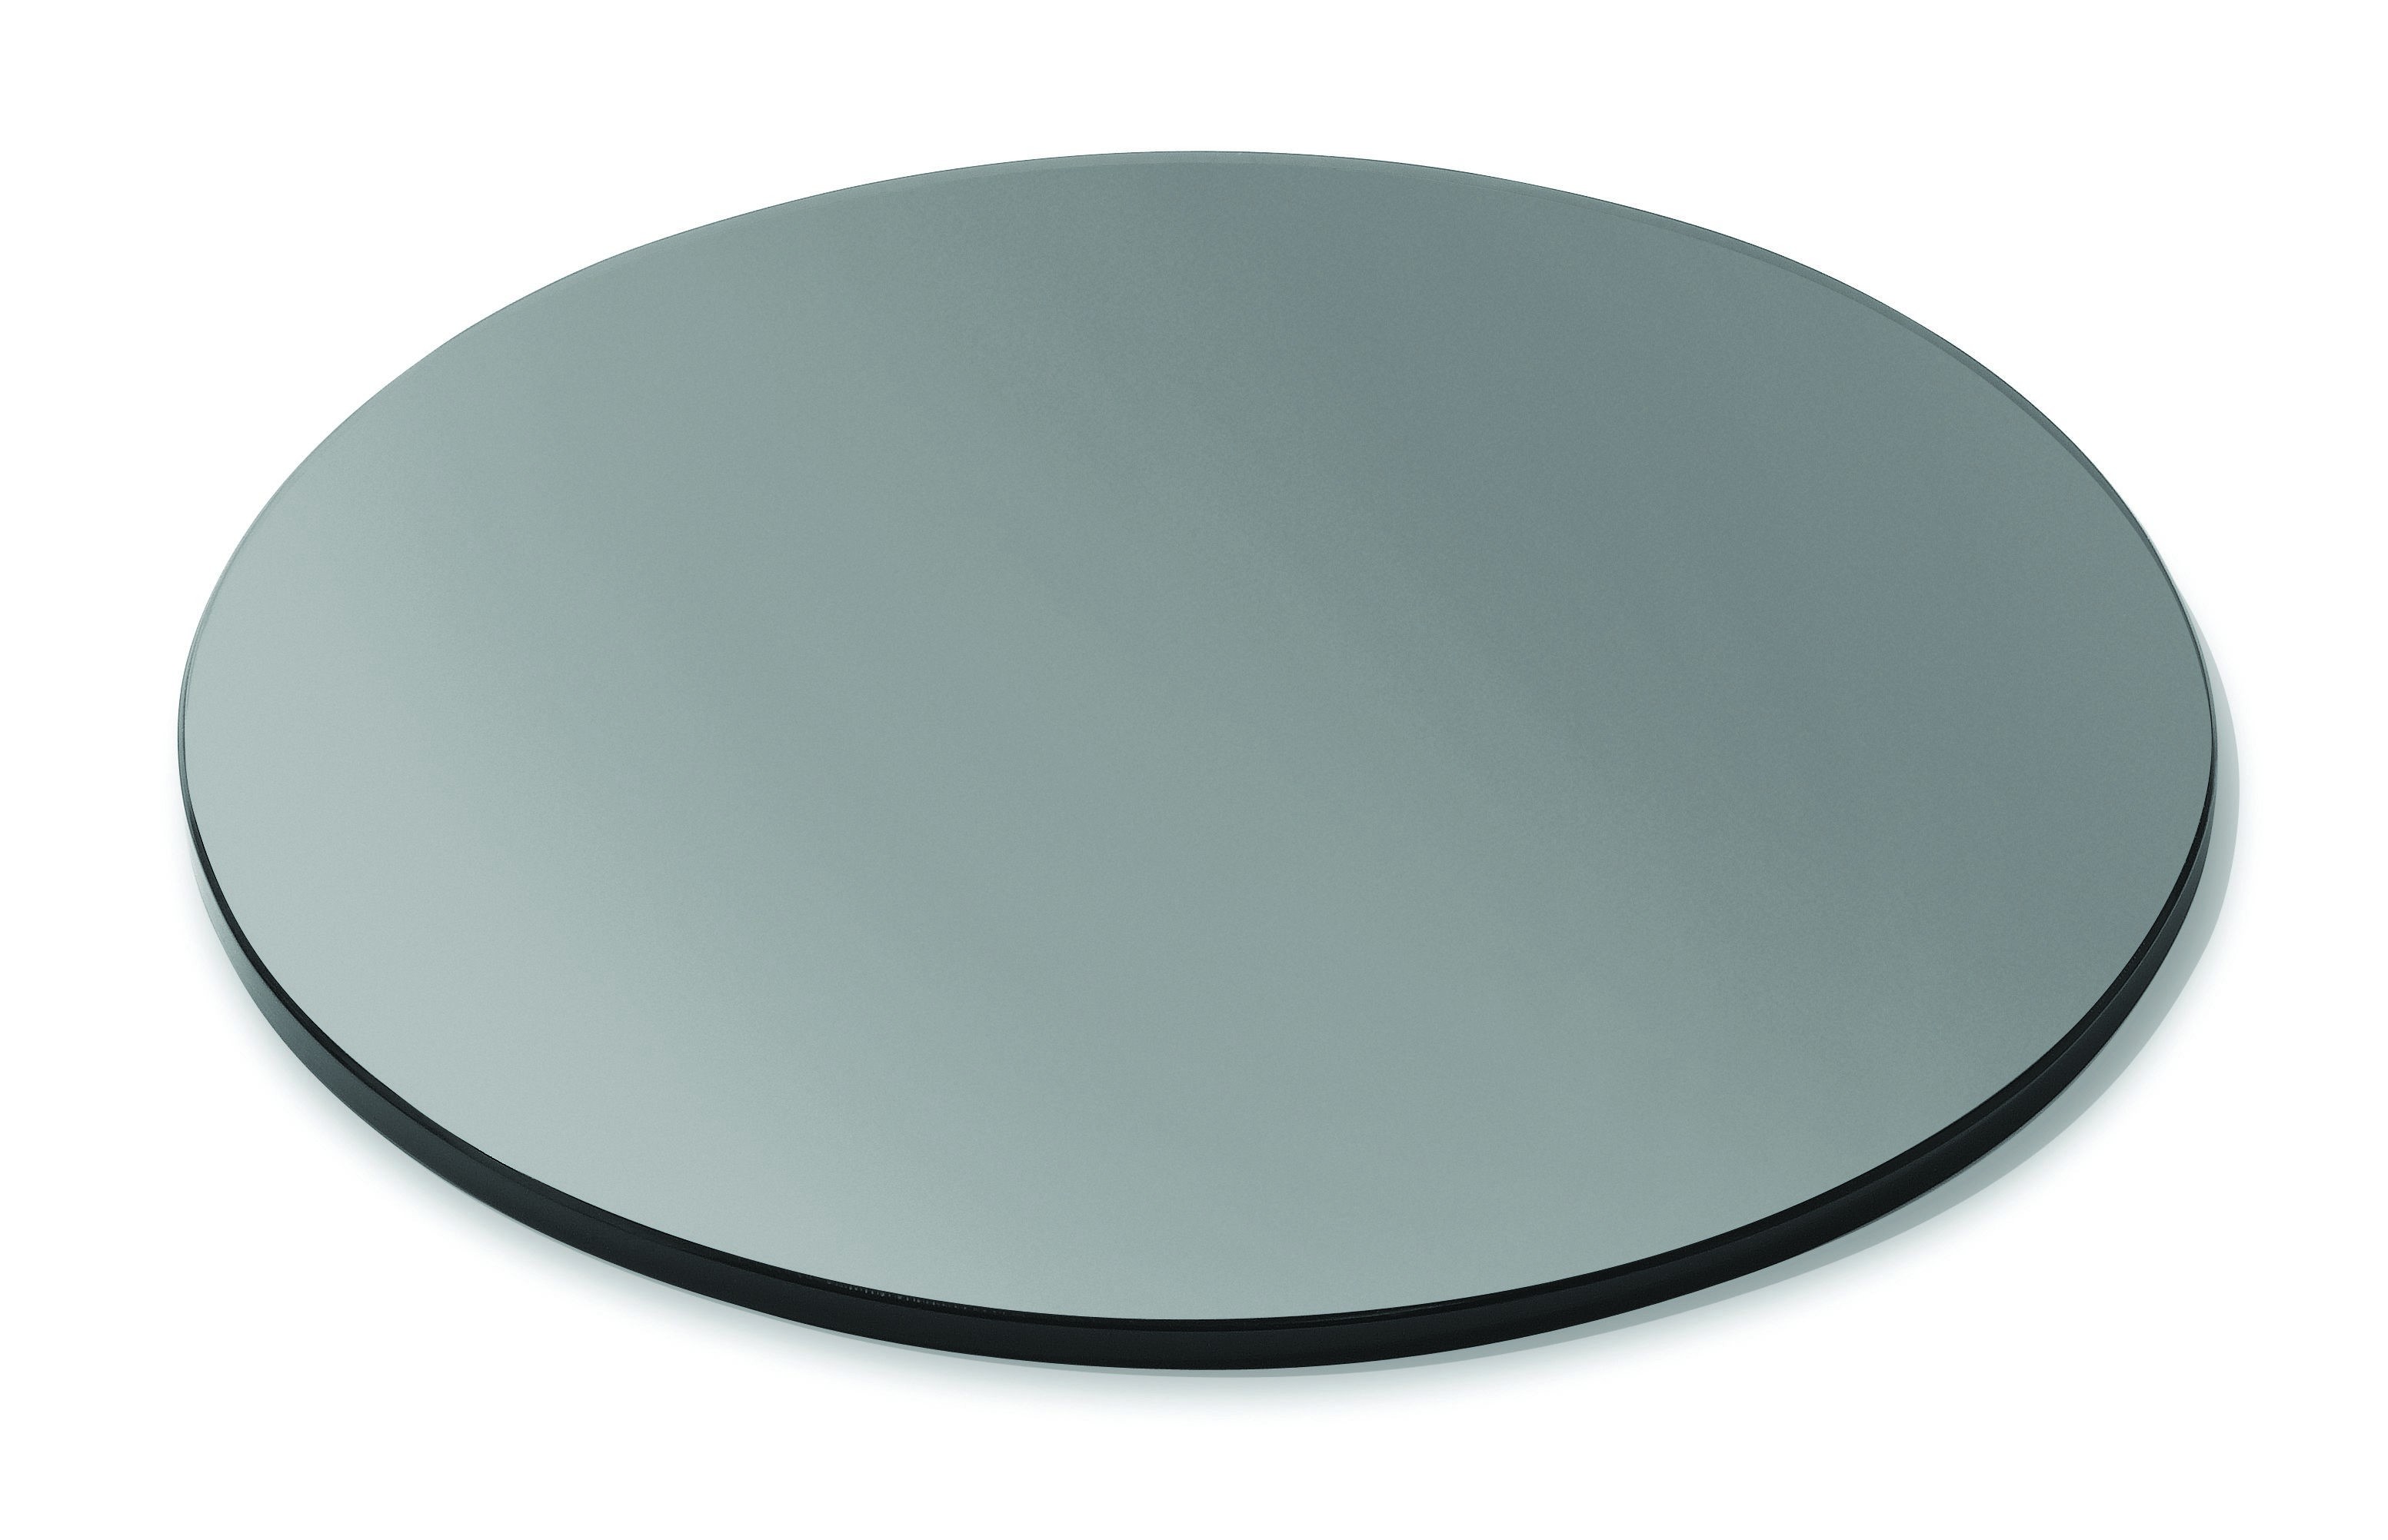 Rosseto SG004 Round Black Tempered Glass Surface 14" x 14"